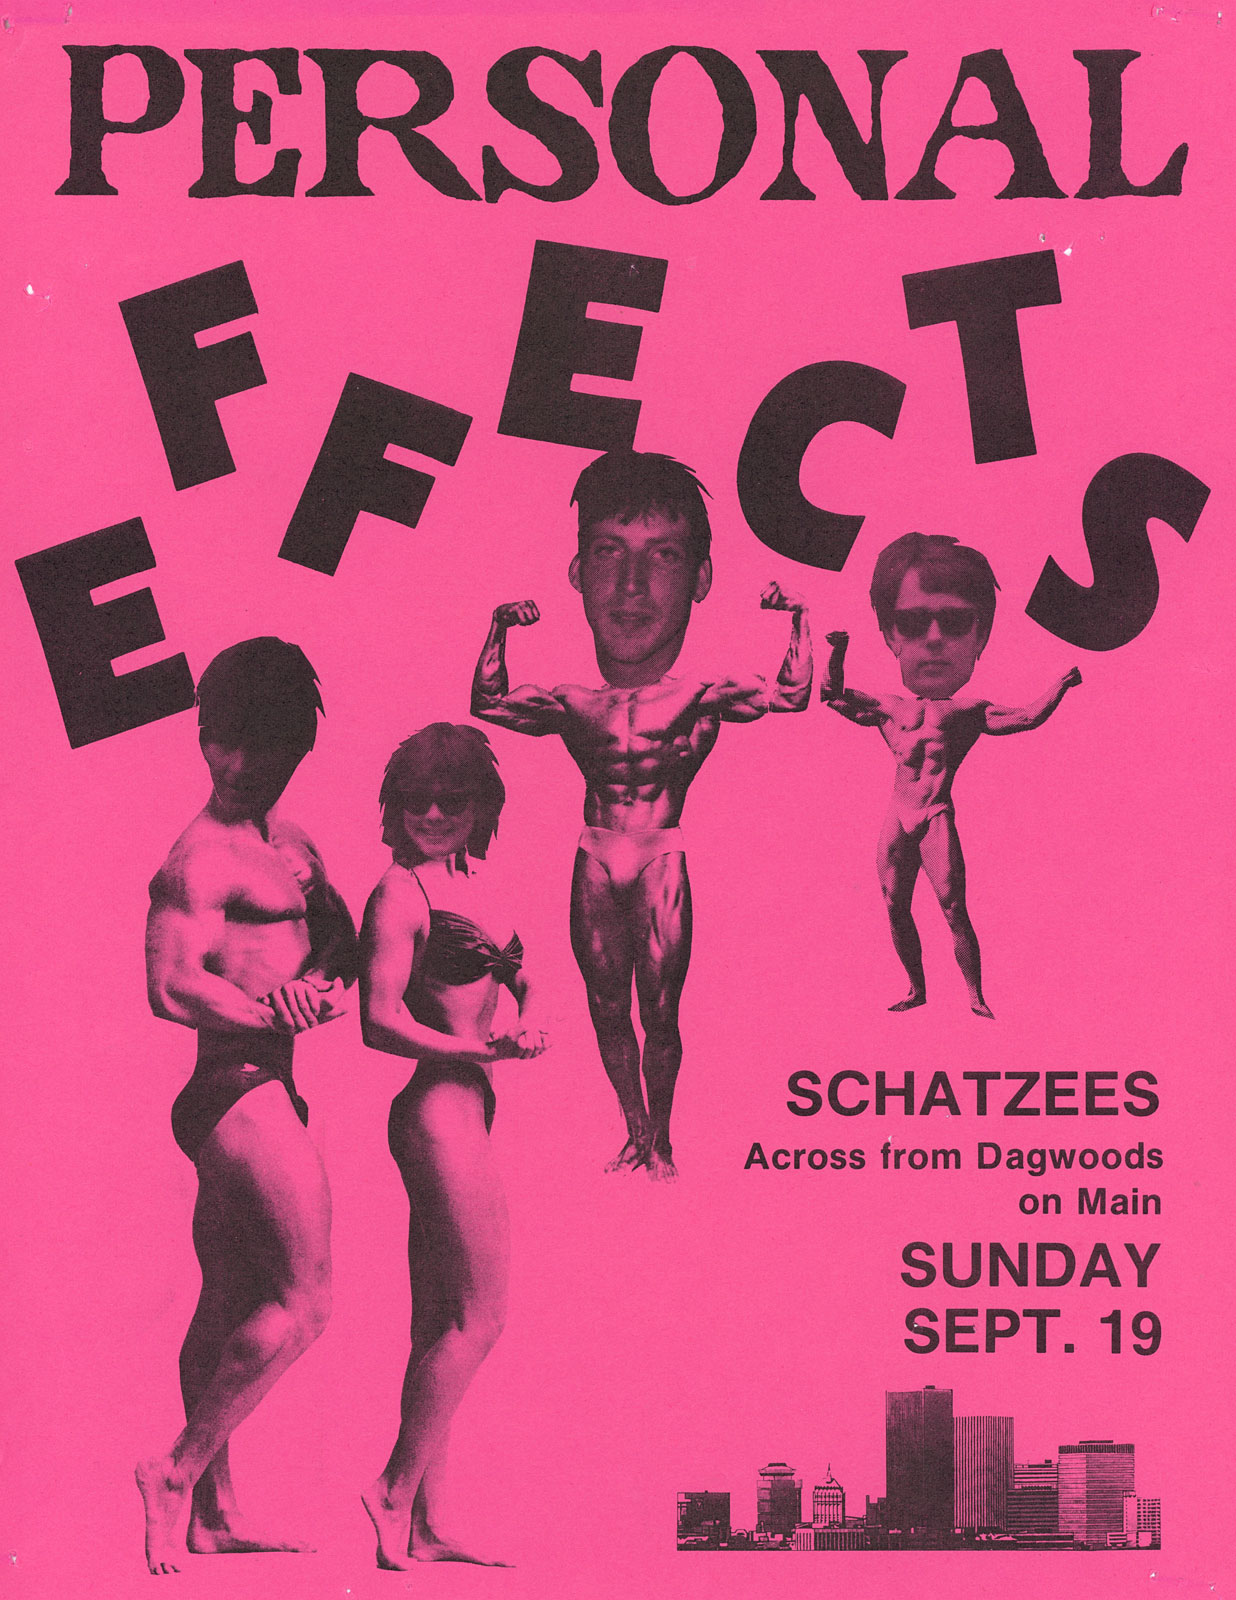 Poster for Personal Effects at Schatzee's in Rochester, New York 09.19.1982